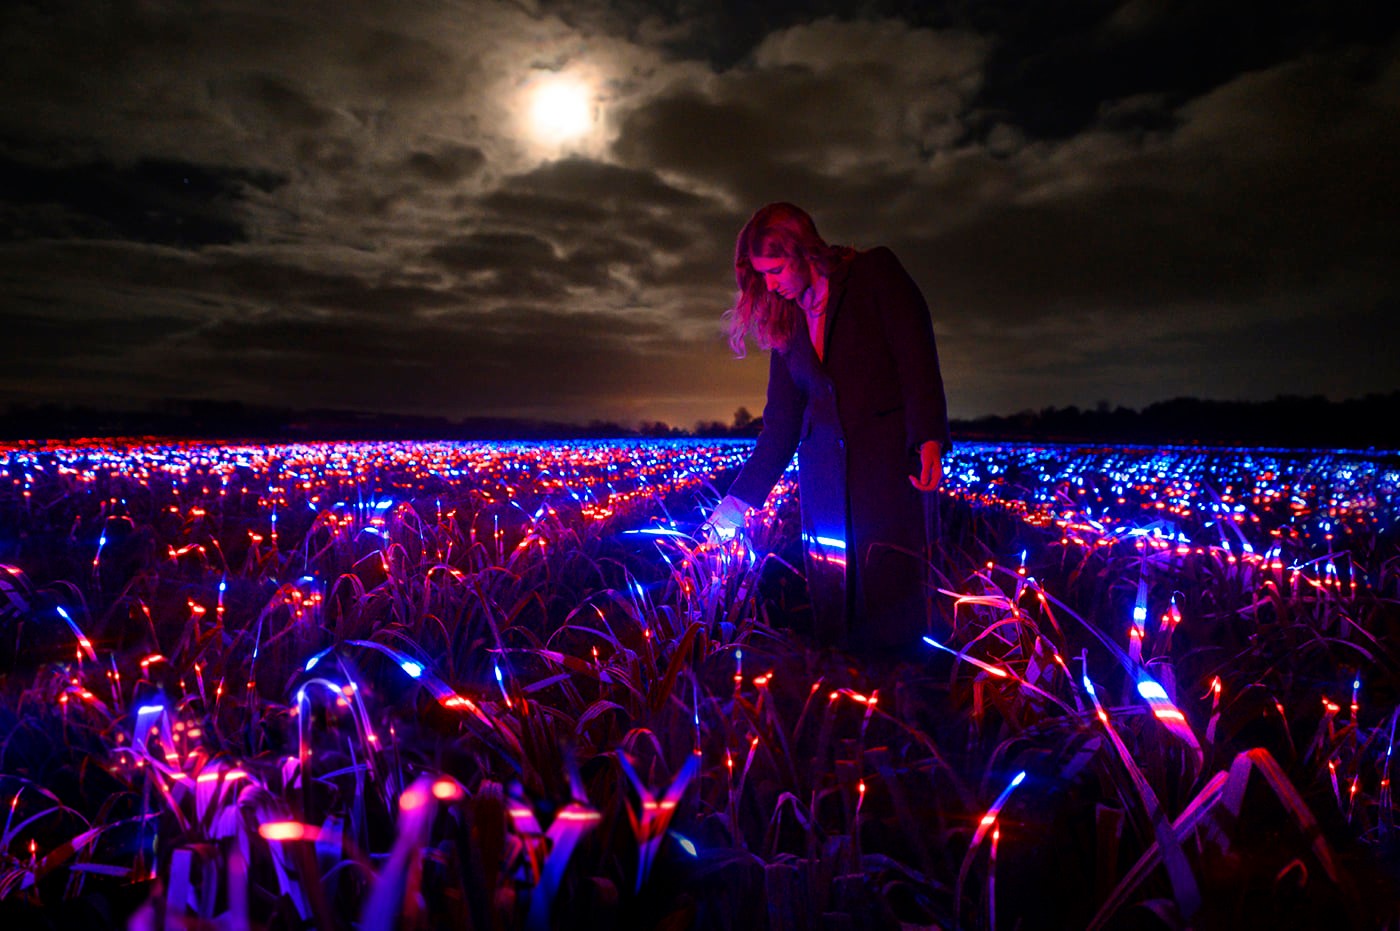 In the world film premiere GROW appears as a 20,000m2 luminous dreamscape of red and blue waves of light over an enormous field. GROW is inspired by scientific light recipes which improve plants’ growth and resilience.